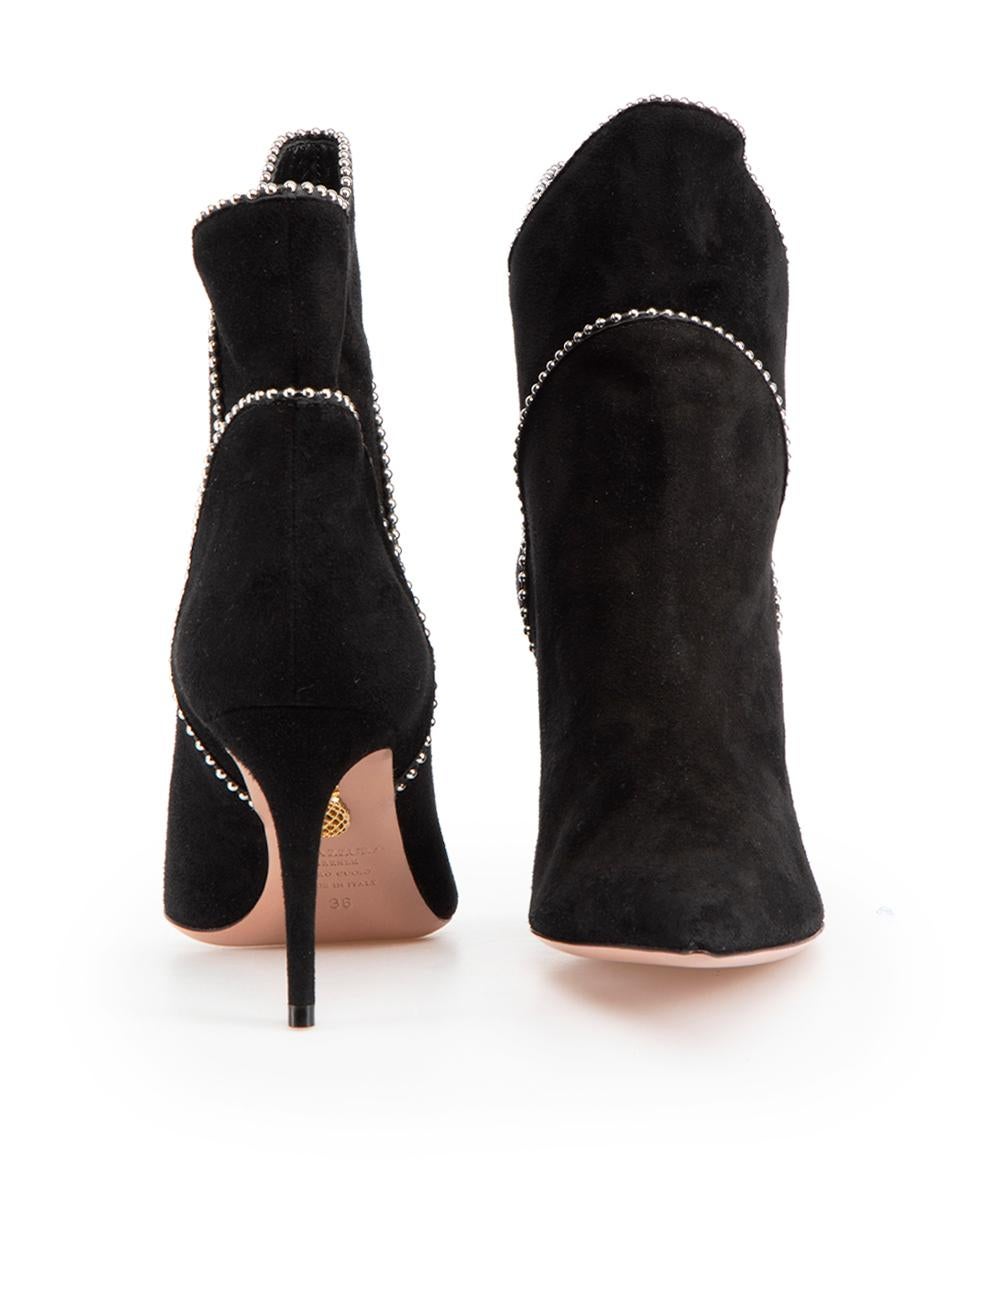 Aquazzura Black Studded Point Suede Boots Size IT 36 In Good Condition For Sale In London, GB